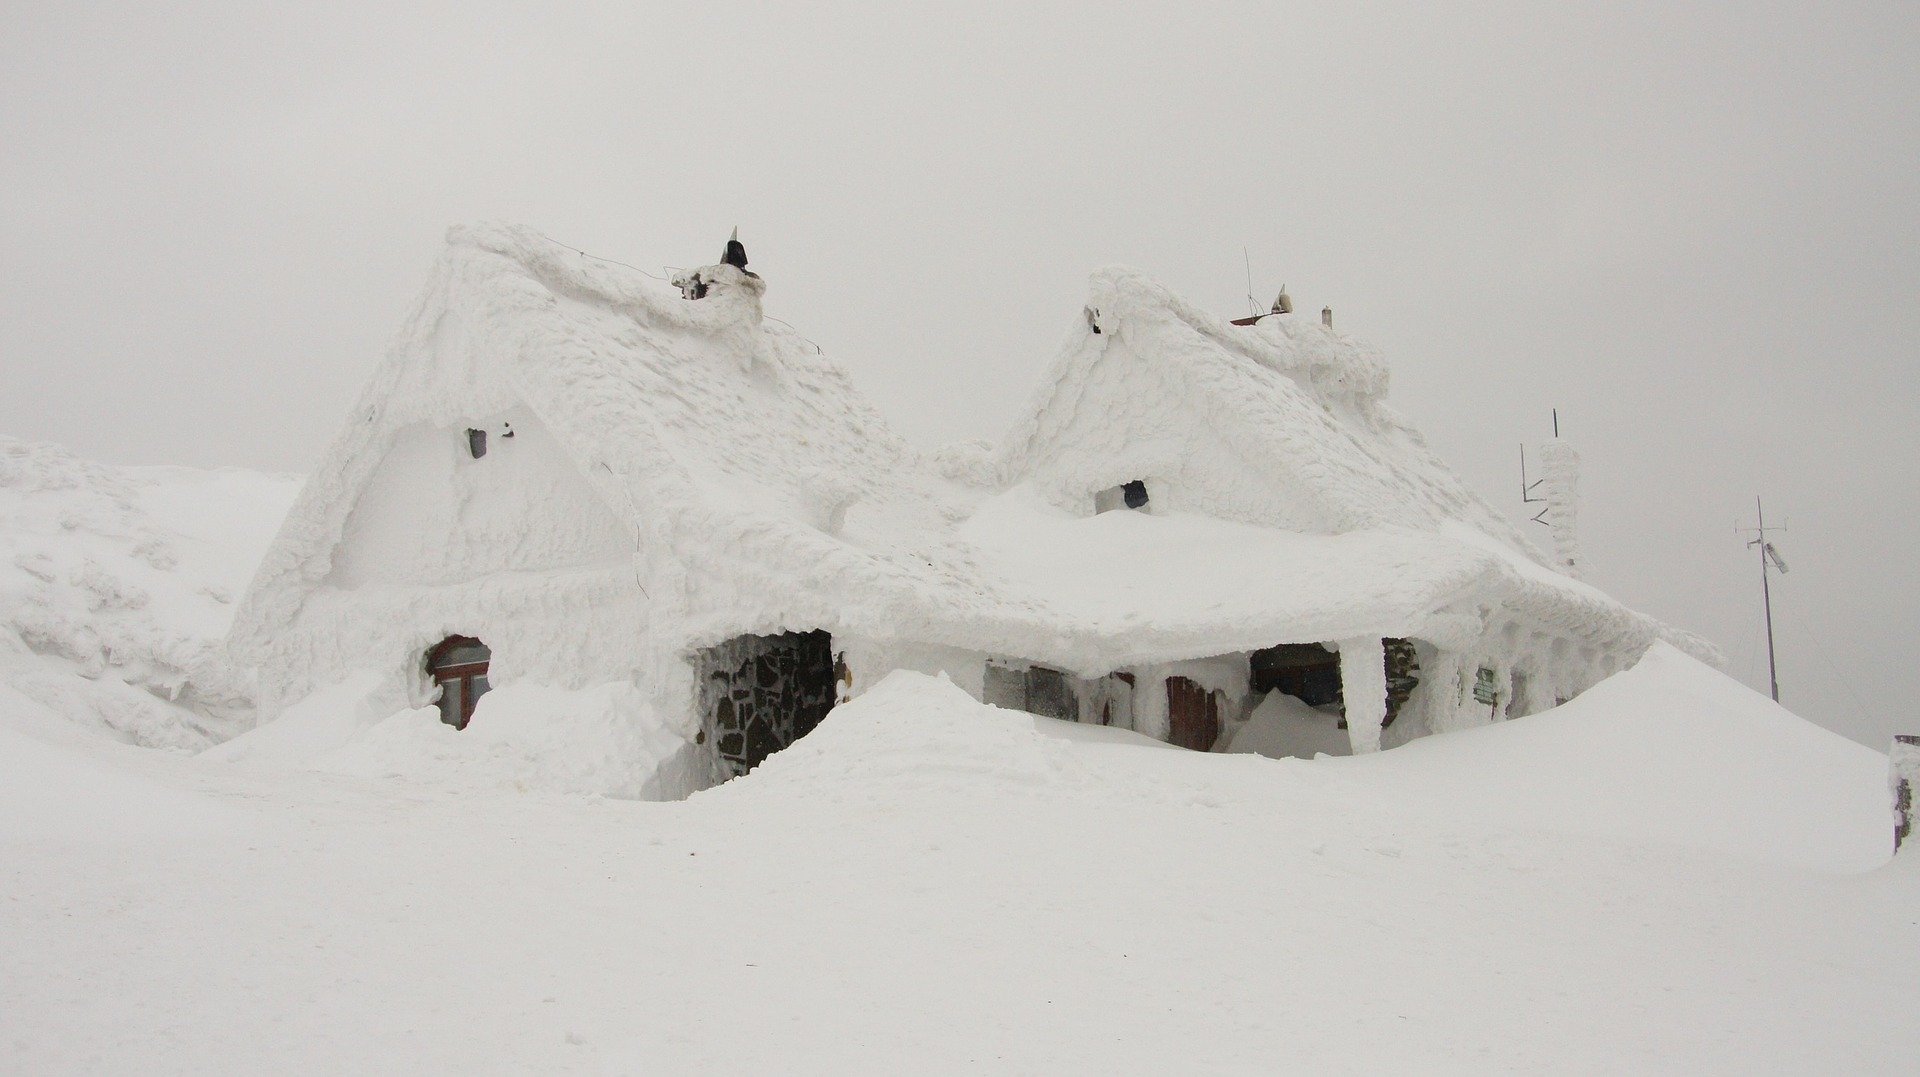 House snow buried by winter storm | Source: Pixabay